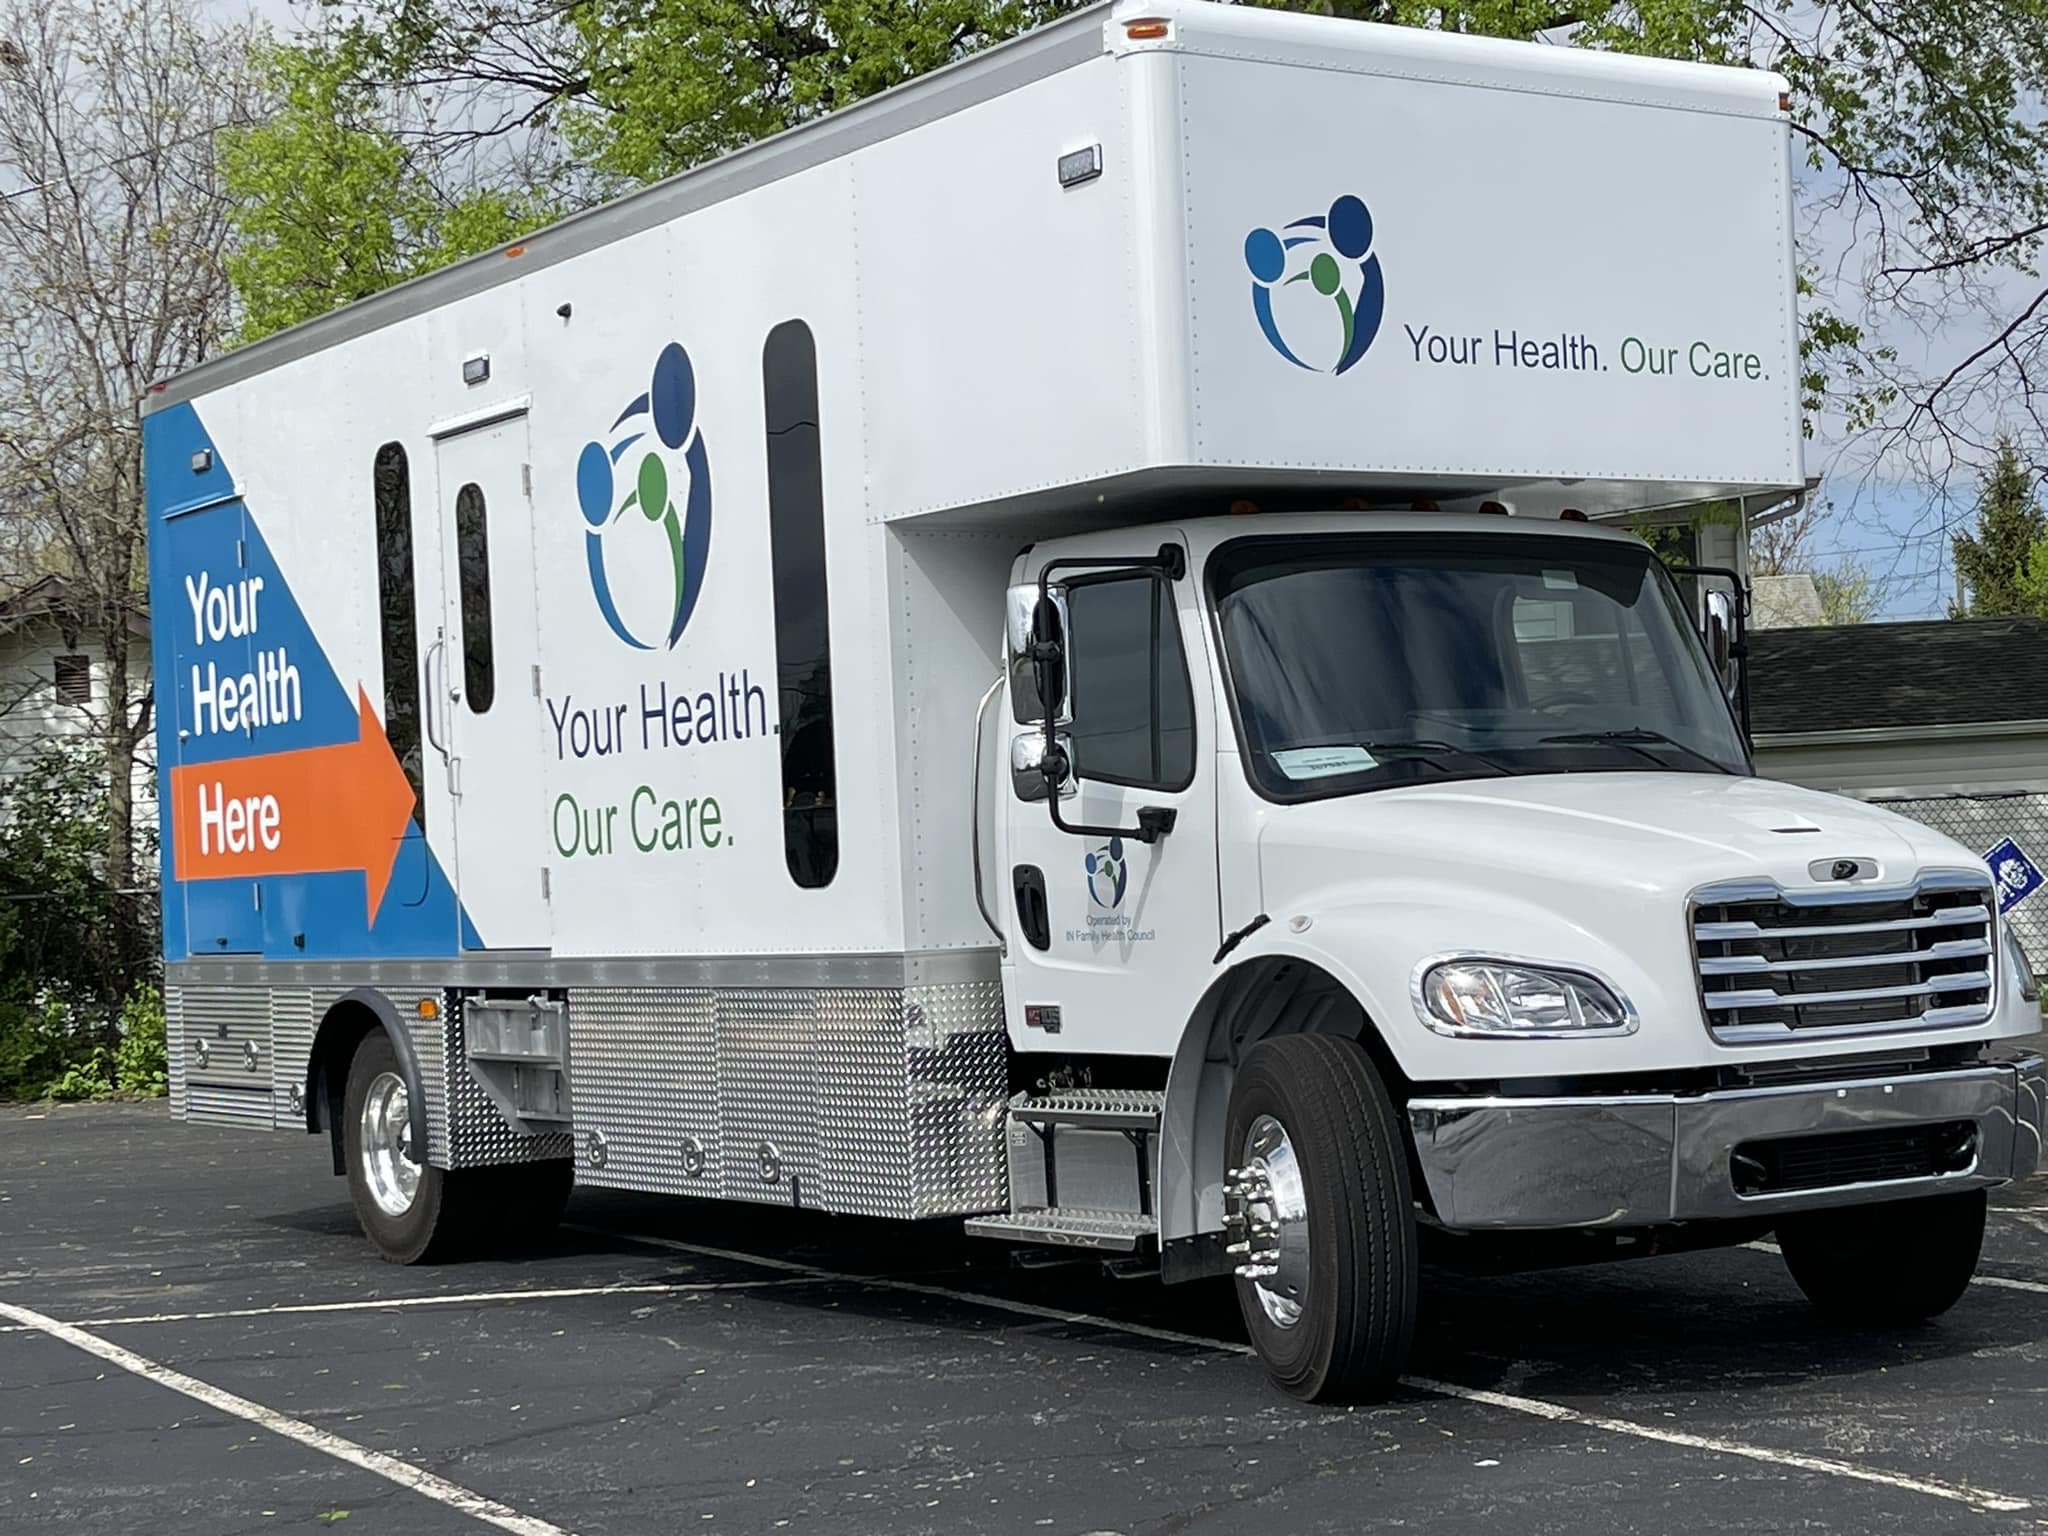 Indiana Family Health Council expands services with new mobile health unit